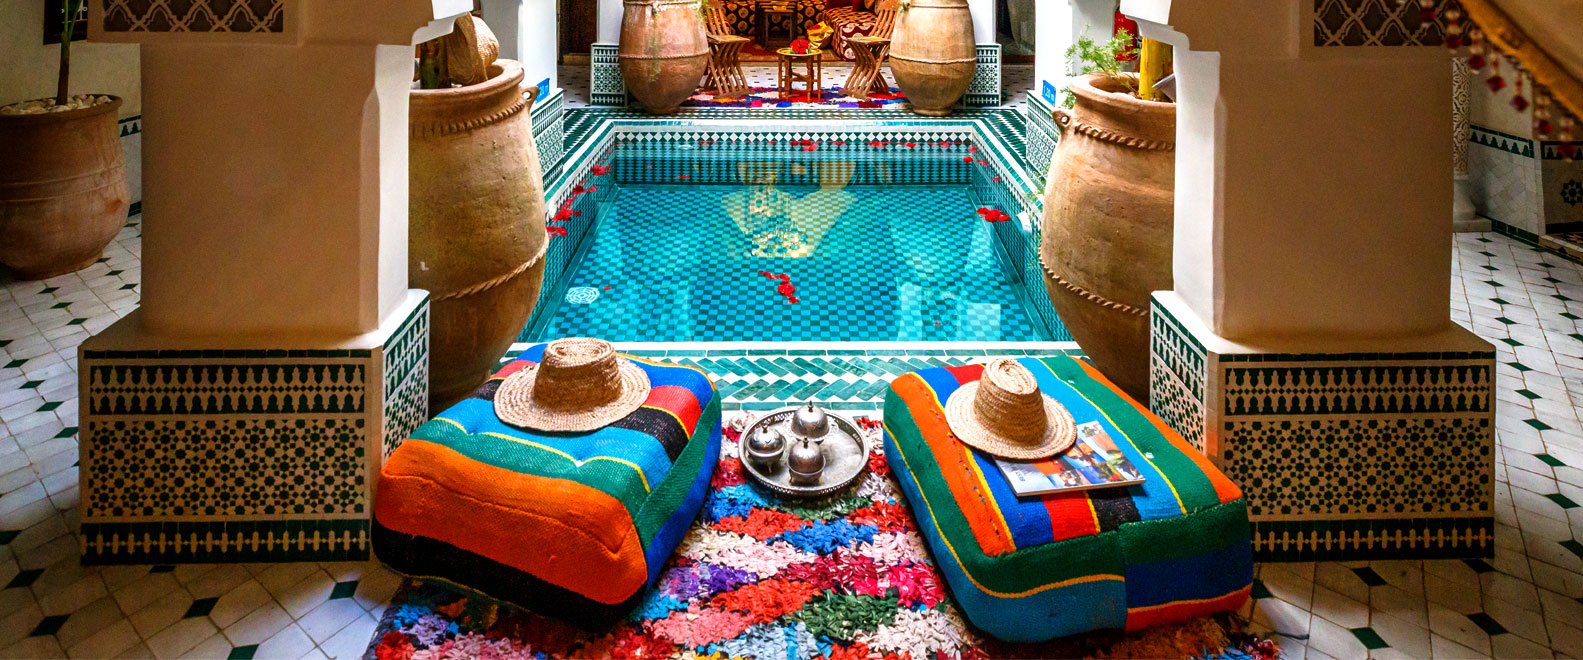 Where to stay in Morocco